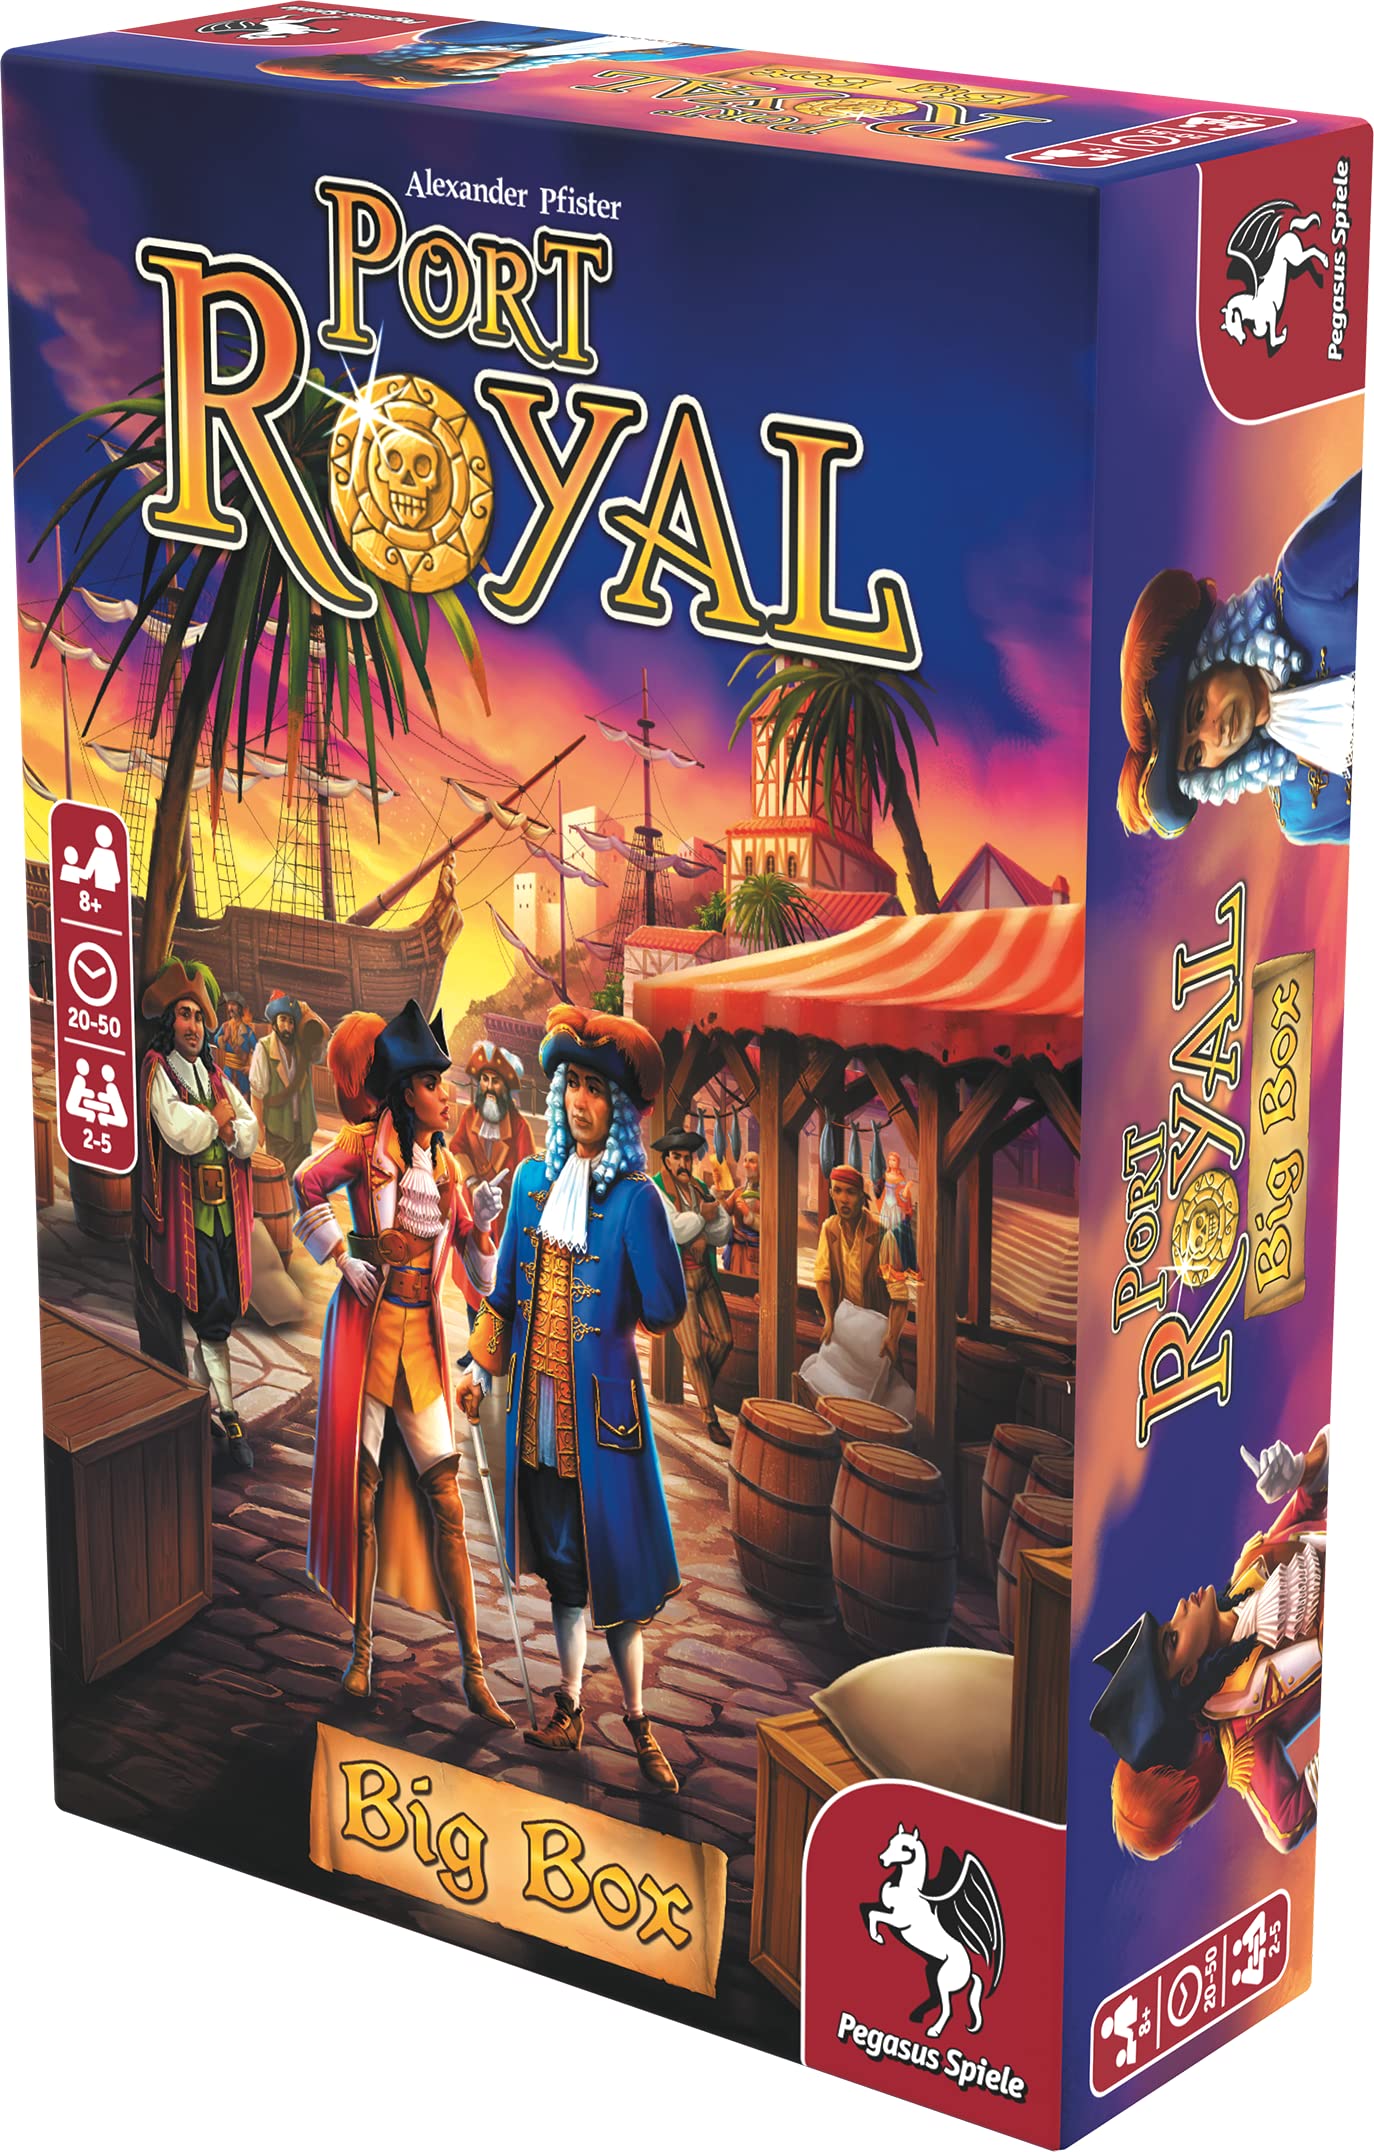 Pegasus Spiele Port Royal Big Box – Card Game 1-5 Players – Card Games for Family – 20-40 Minutes of Gameplay – Games for Family Game Night – Card Games for Kids and Adults Ages 8+ - English